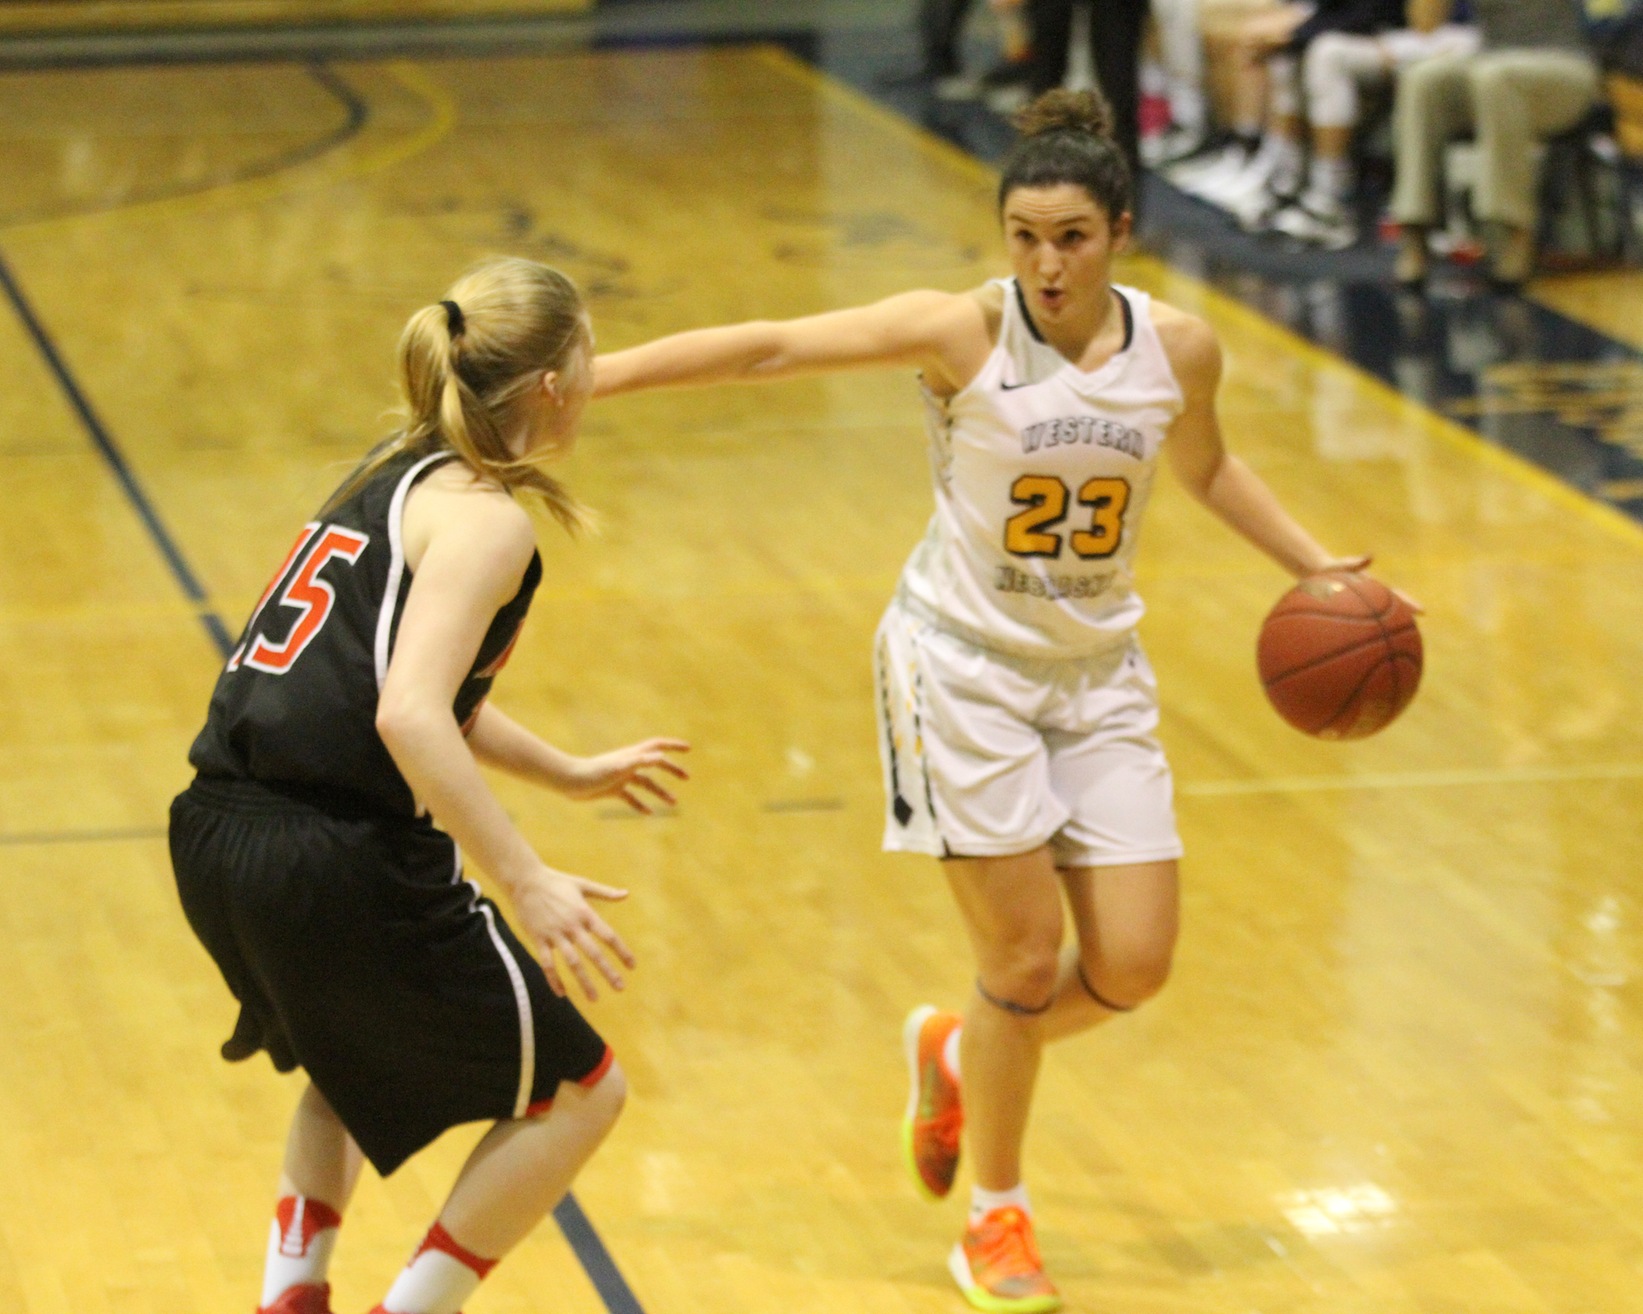 WNCC wins overtime thriller to advance to semis